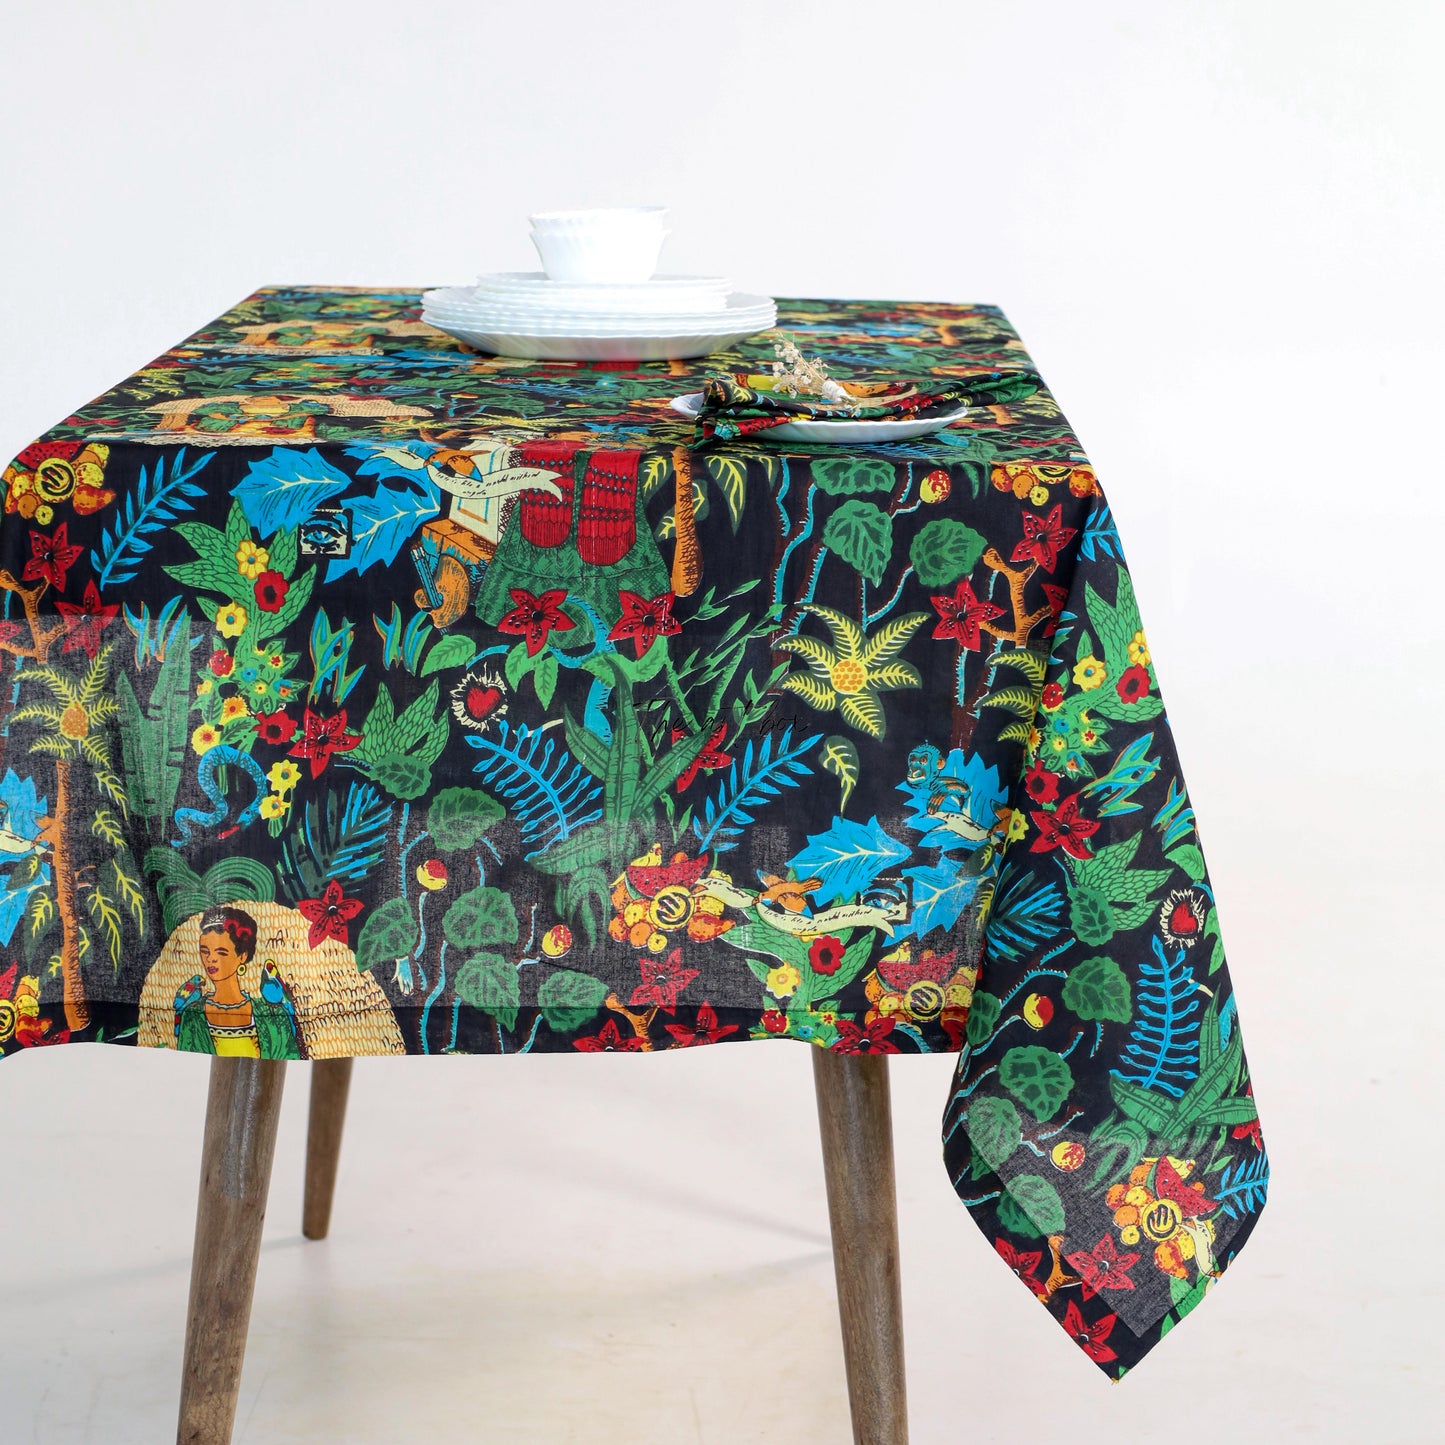 Best Green Black Cotton Floral Printed Table Covers for Dining and Living Table Covers